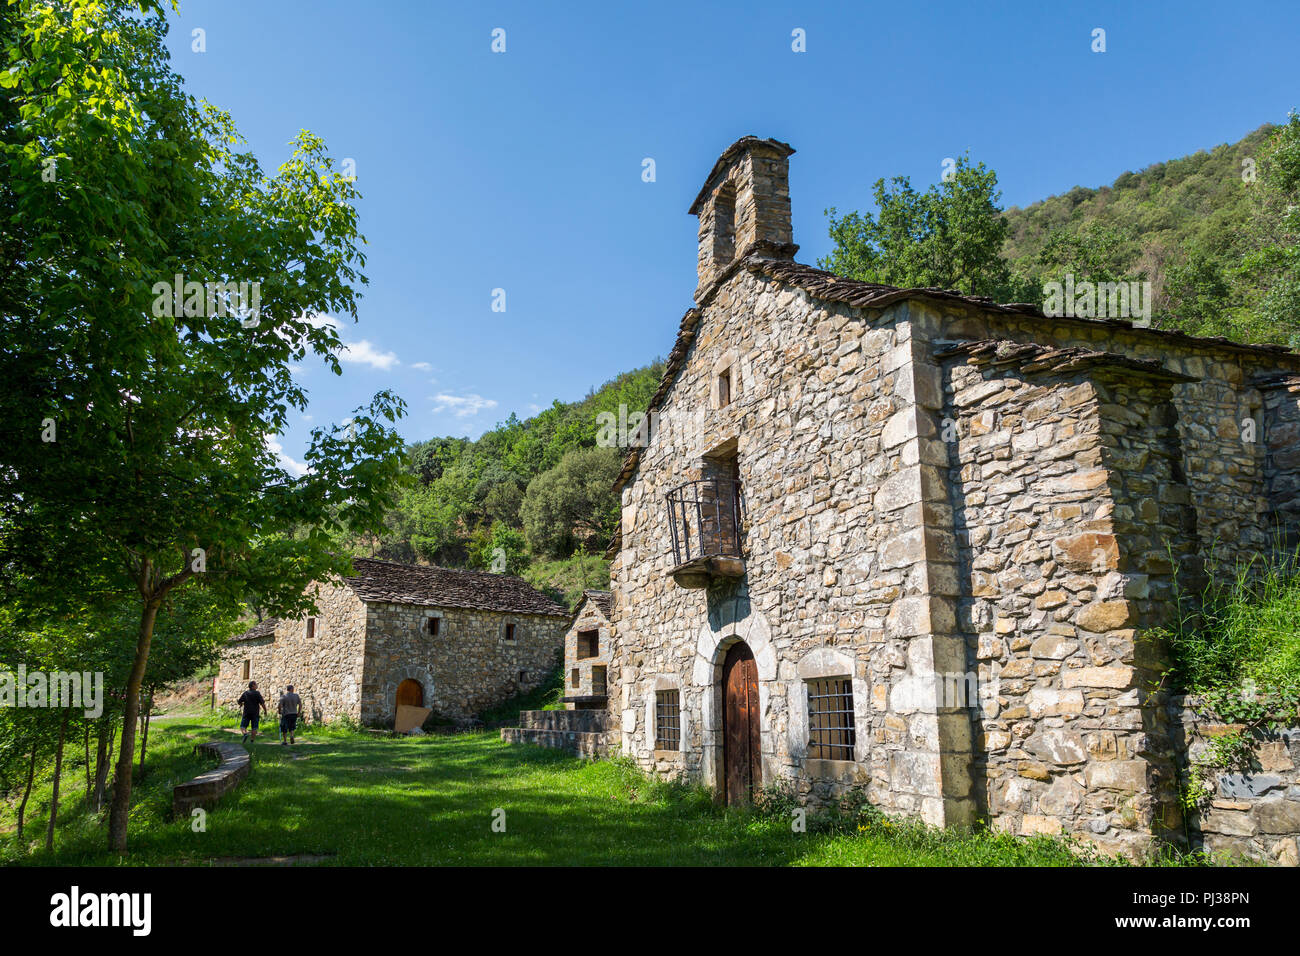 The hermitage of Fuensanta near Laspuña, or A Espunya, Huesca Province, Aragon, Spain.  The hermitage dates from the 17th century.  The smaller buildi Stock Photo